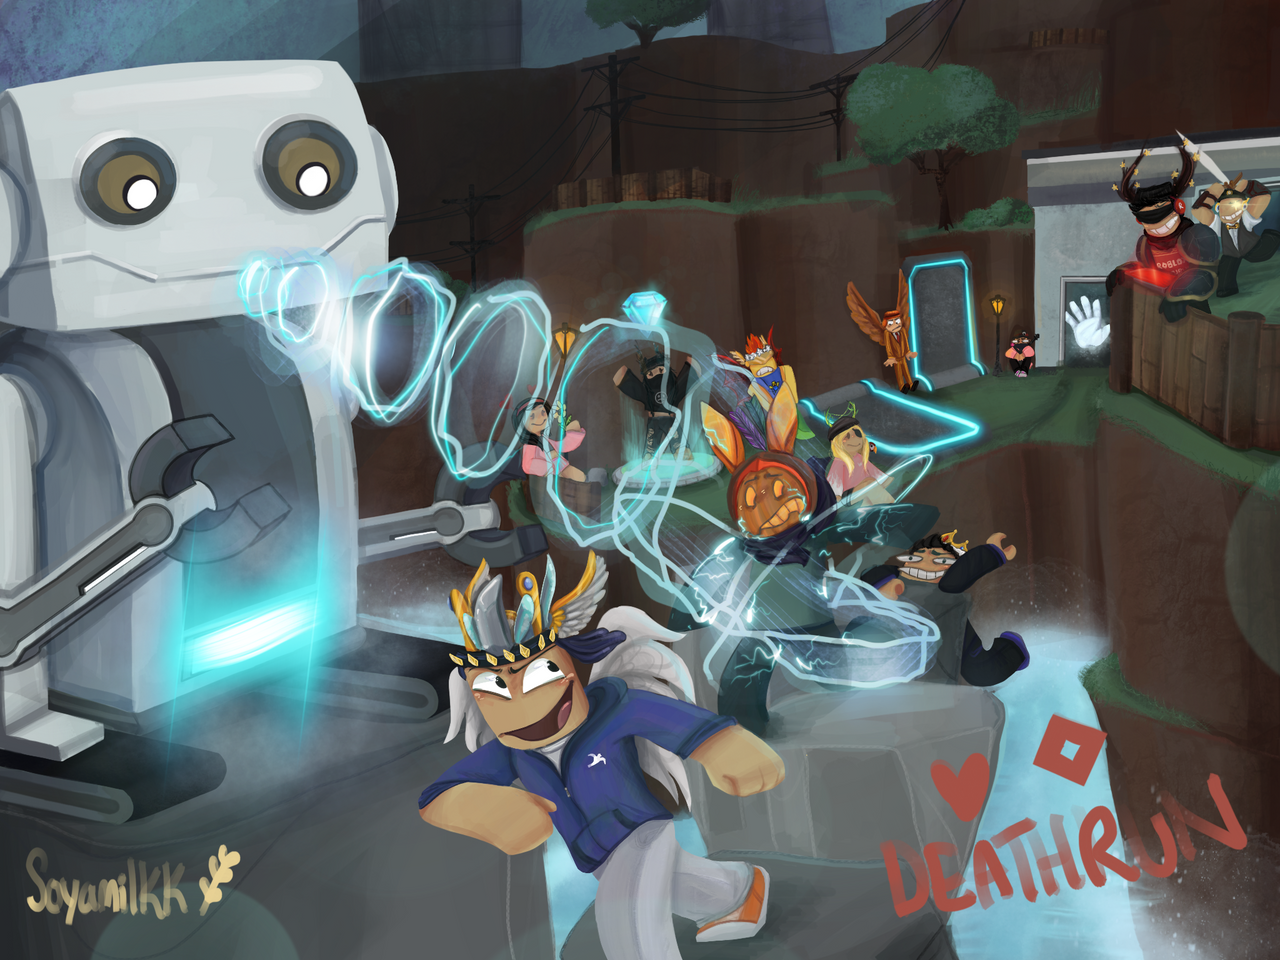 Roblox Deathrun Fanart Electricity Outpost By Soyyedmilk On Deviantart - roblox deathrun roblox